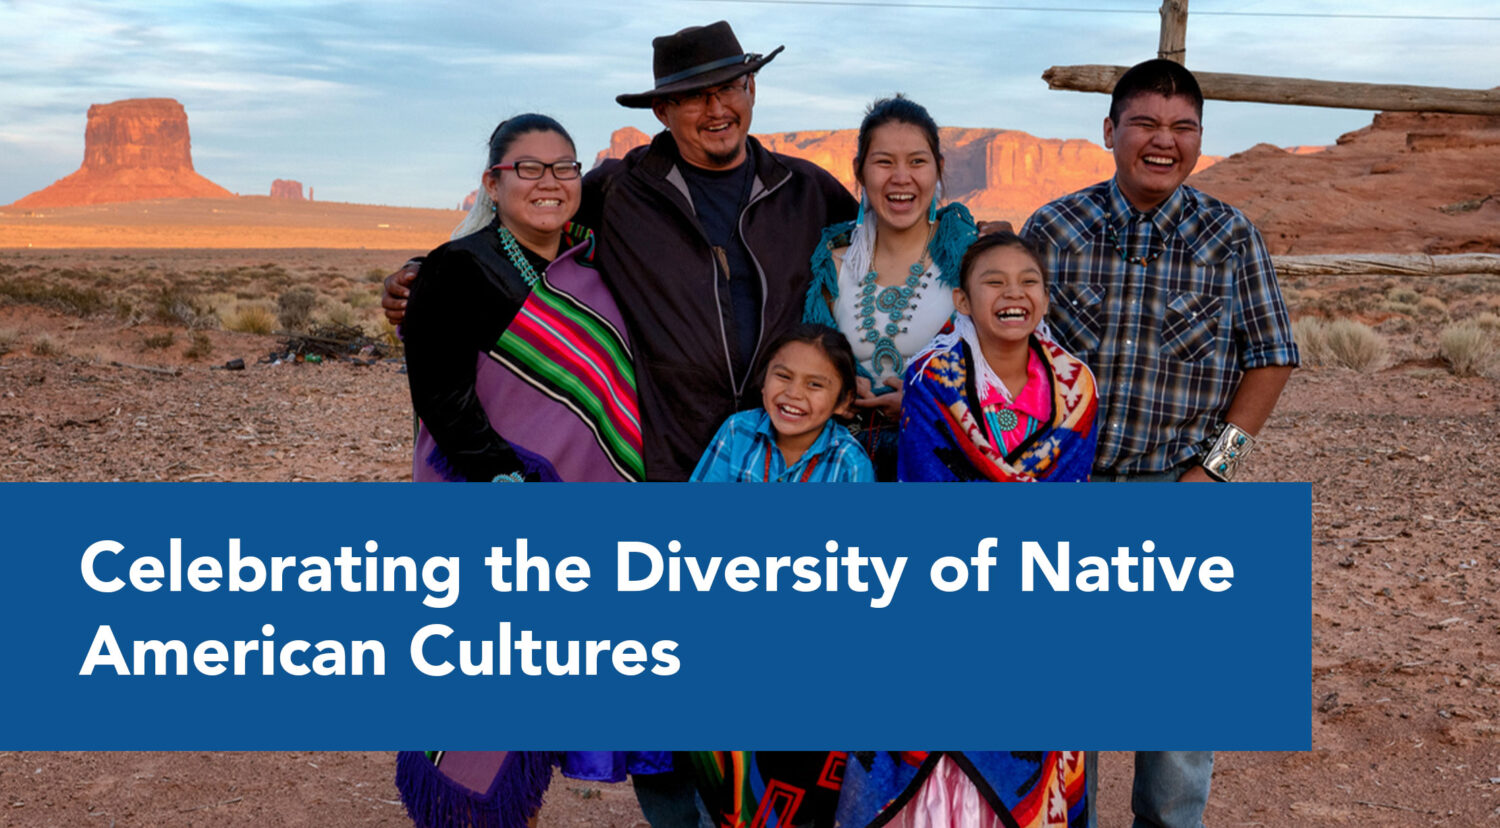 Celebrating the diversity of Native American Cultures